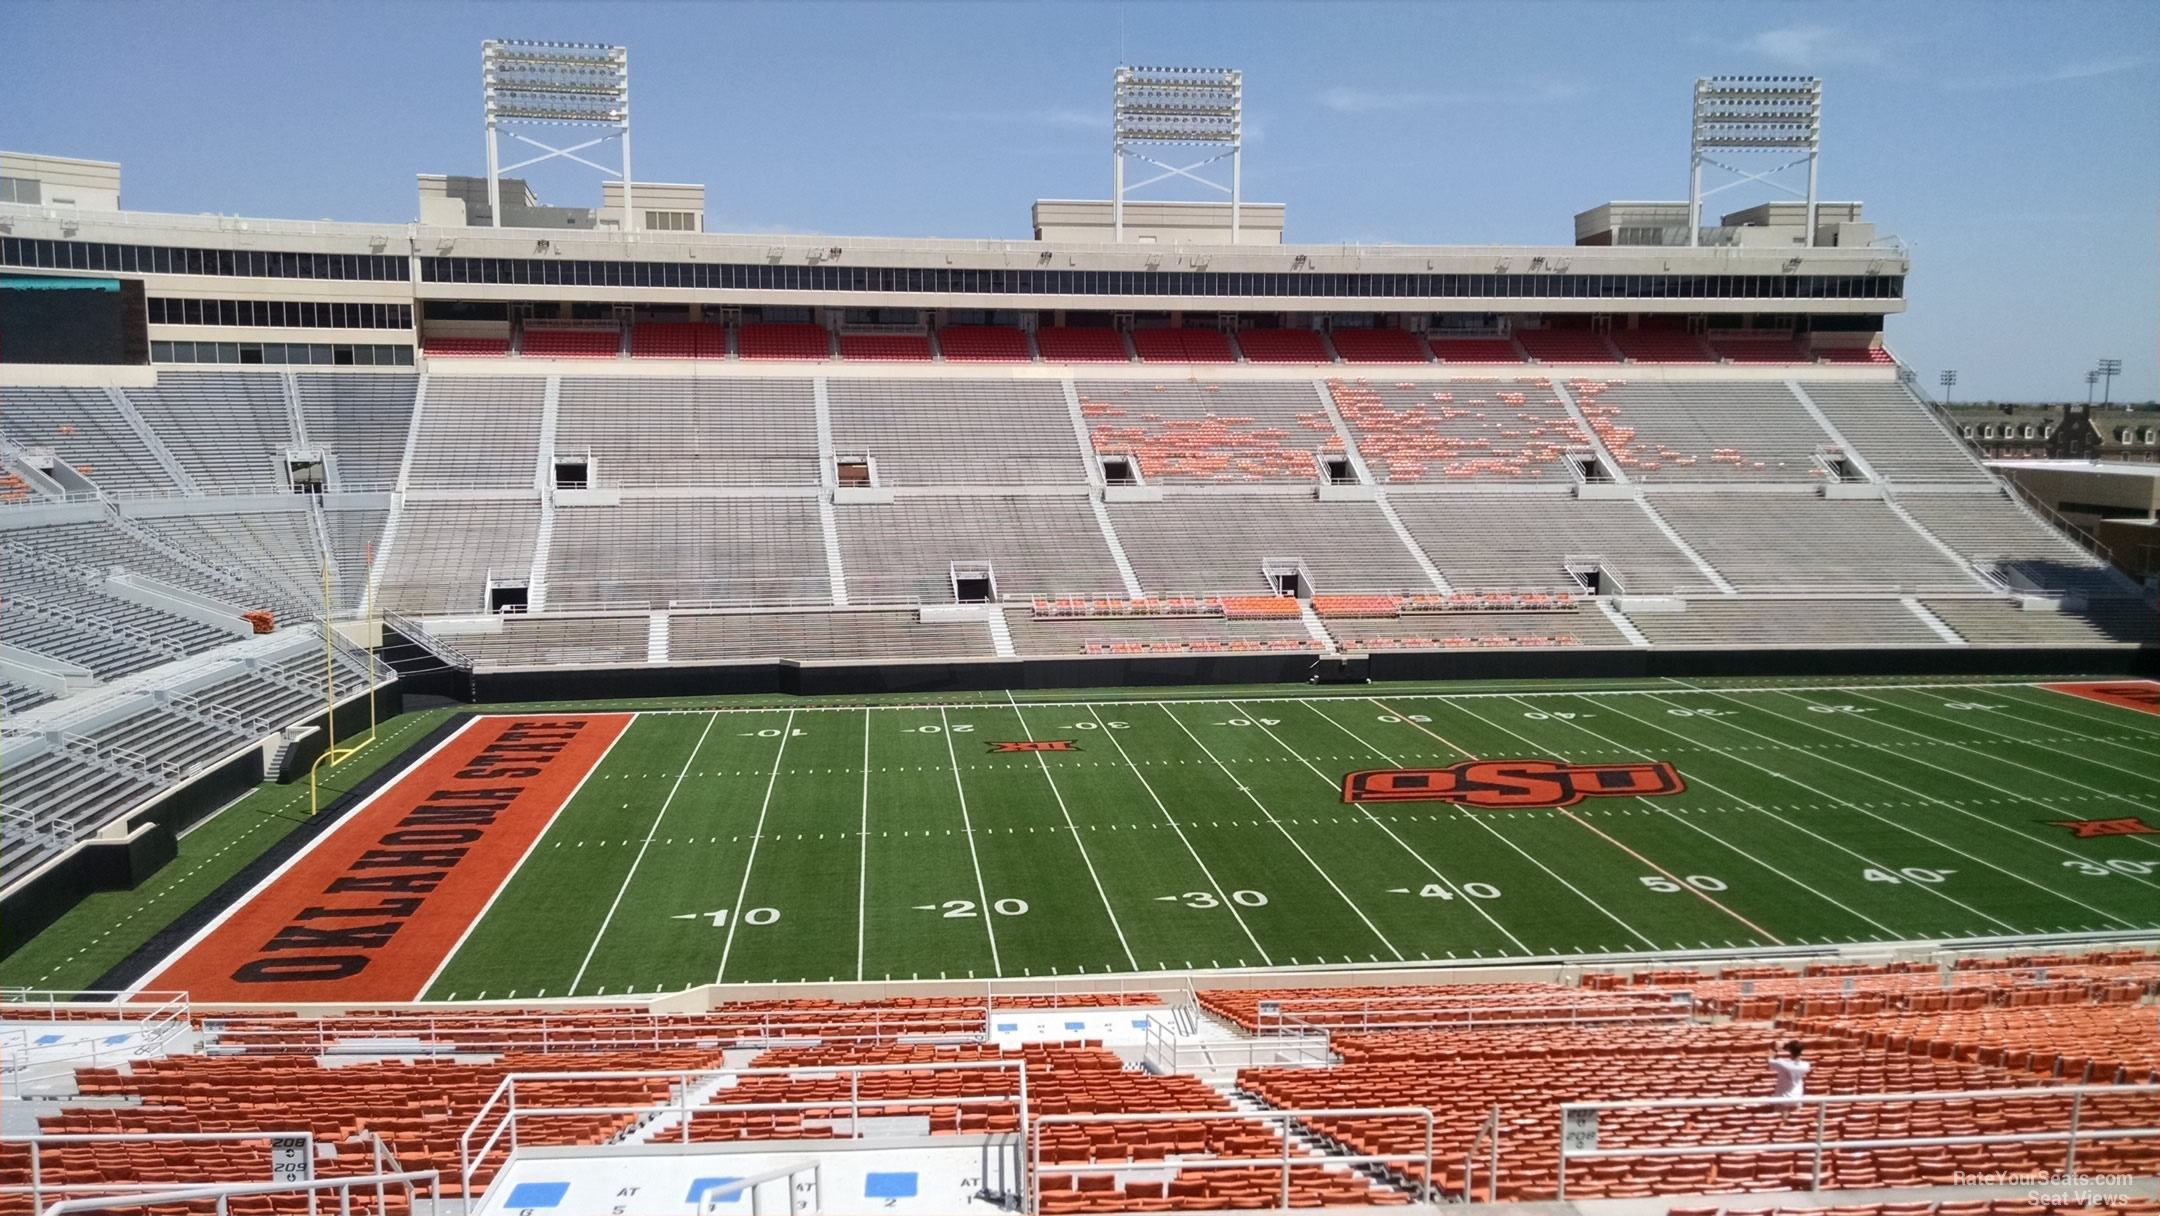 section 308, row 19 seat view  - boone pickens stadium